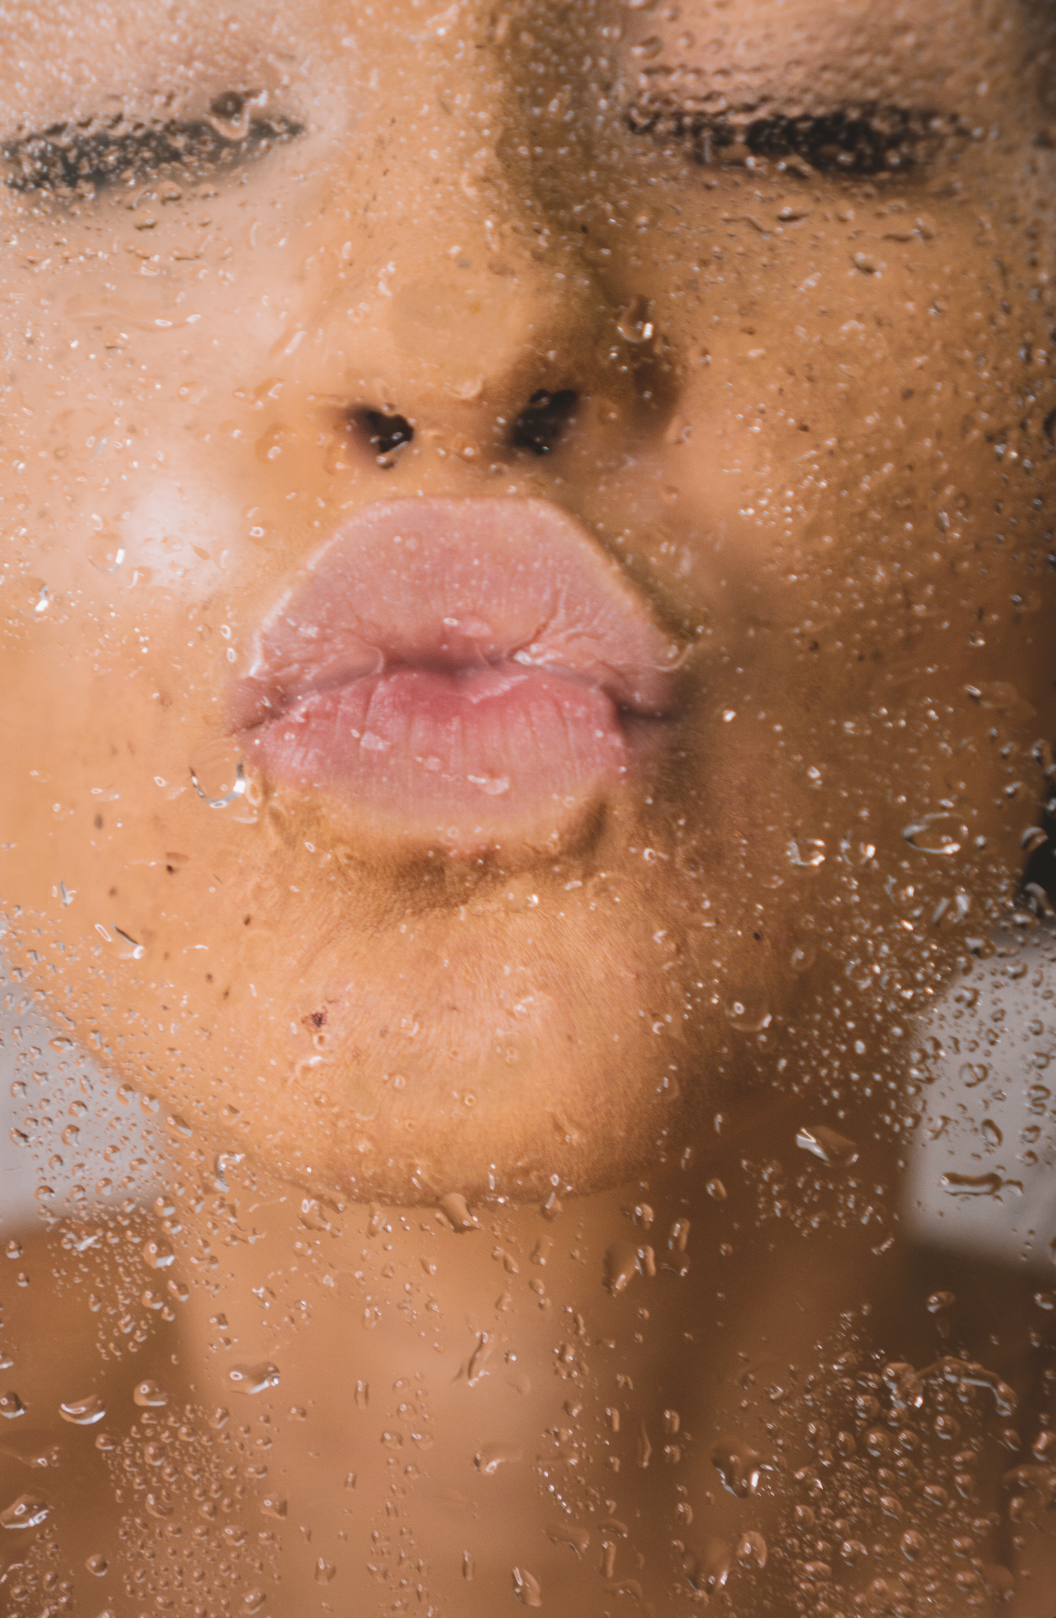 image of person kissing wet glass for alter planning co's blog on moisture barrier